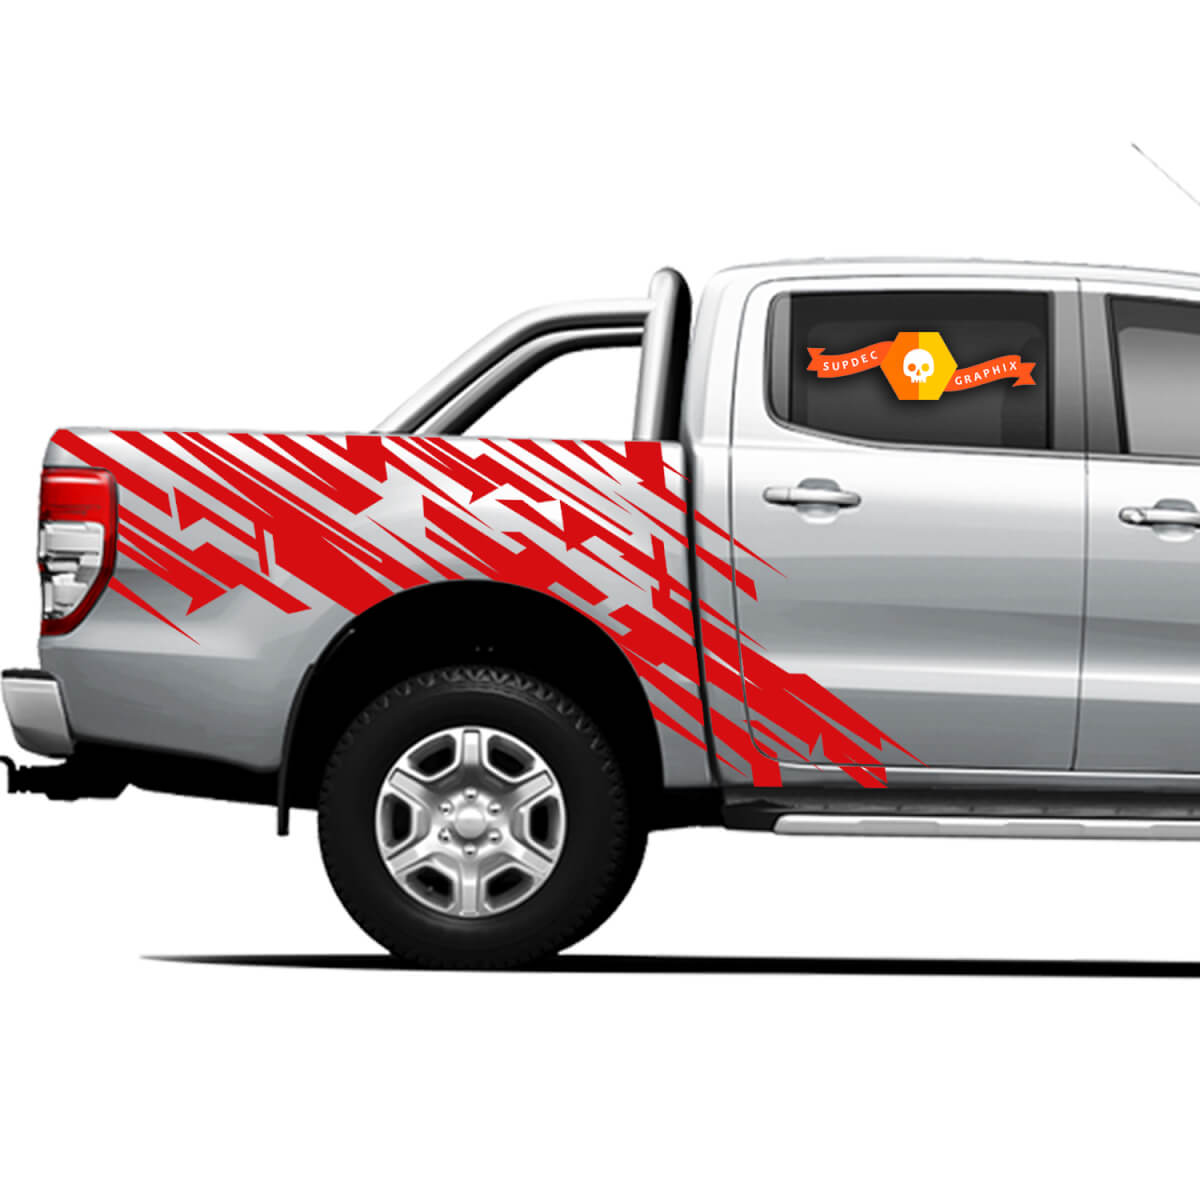 2 Any colors 4×4 Truck Side Bed Graphics Decals for Ford Ranger Red Lines